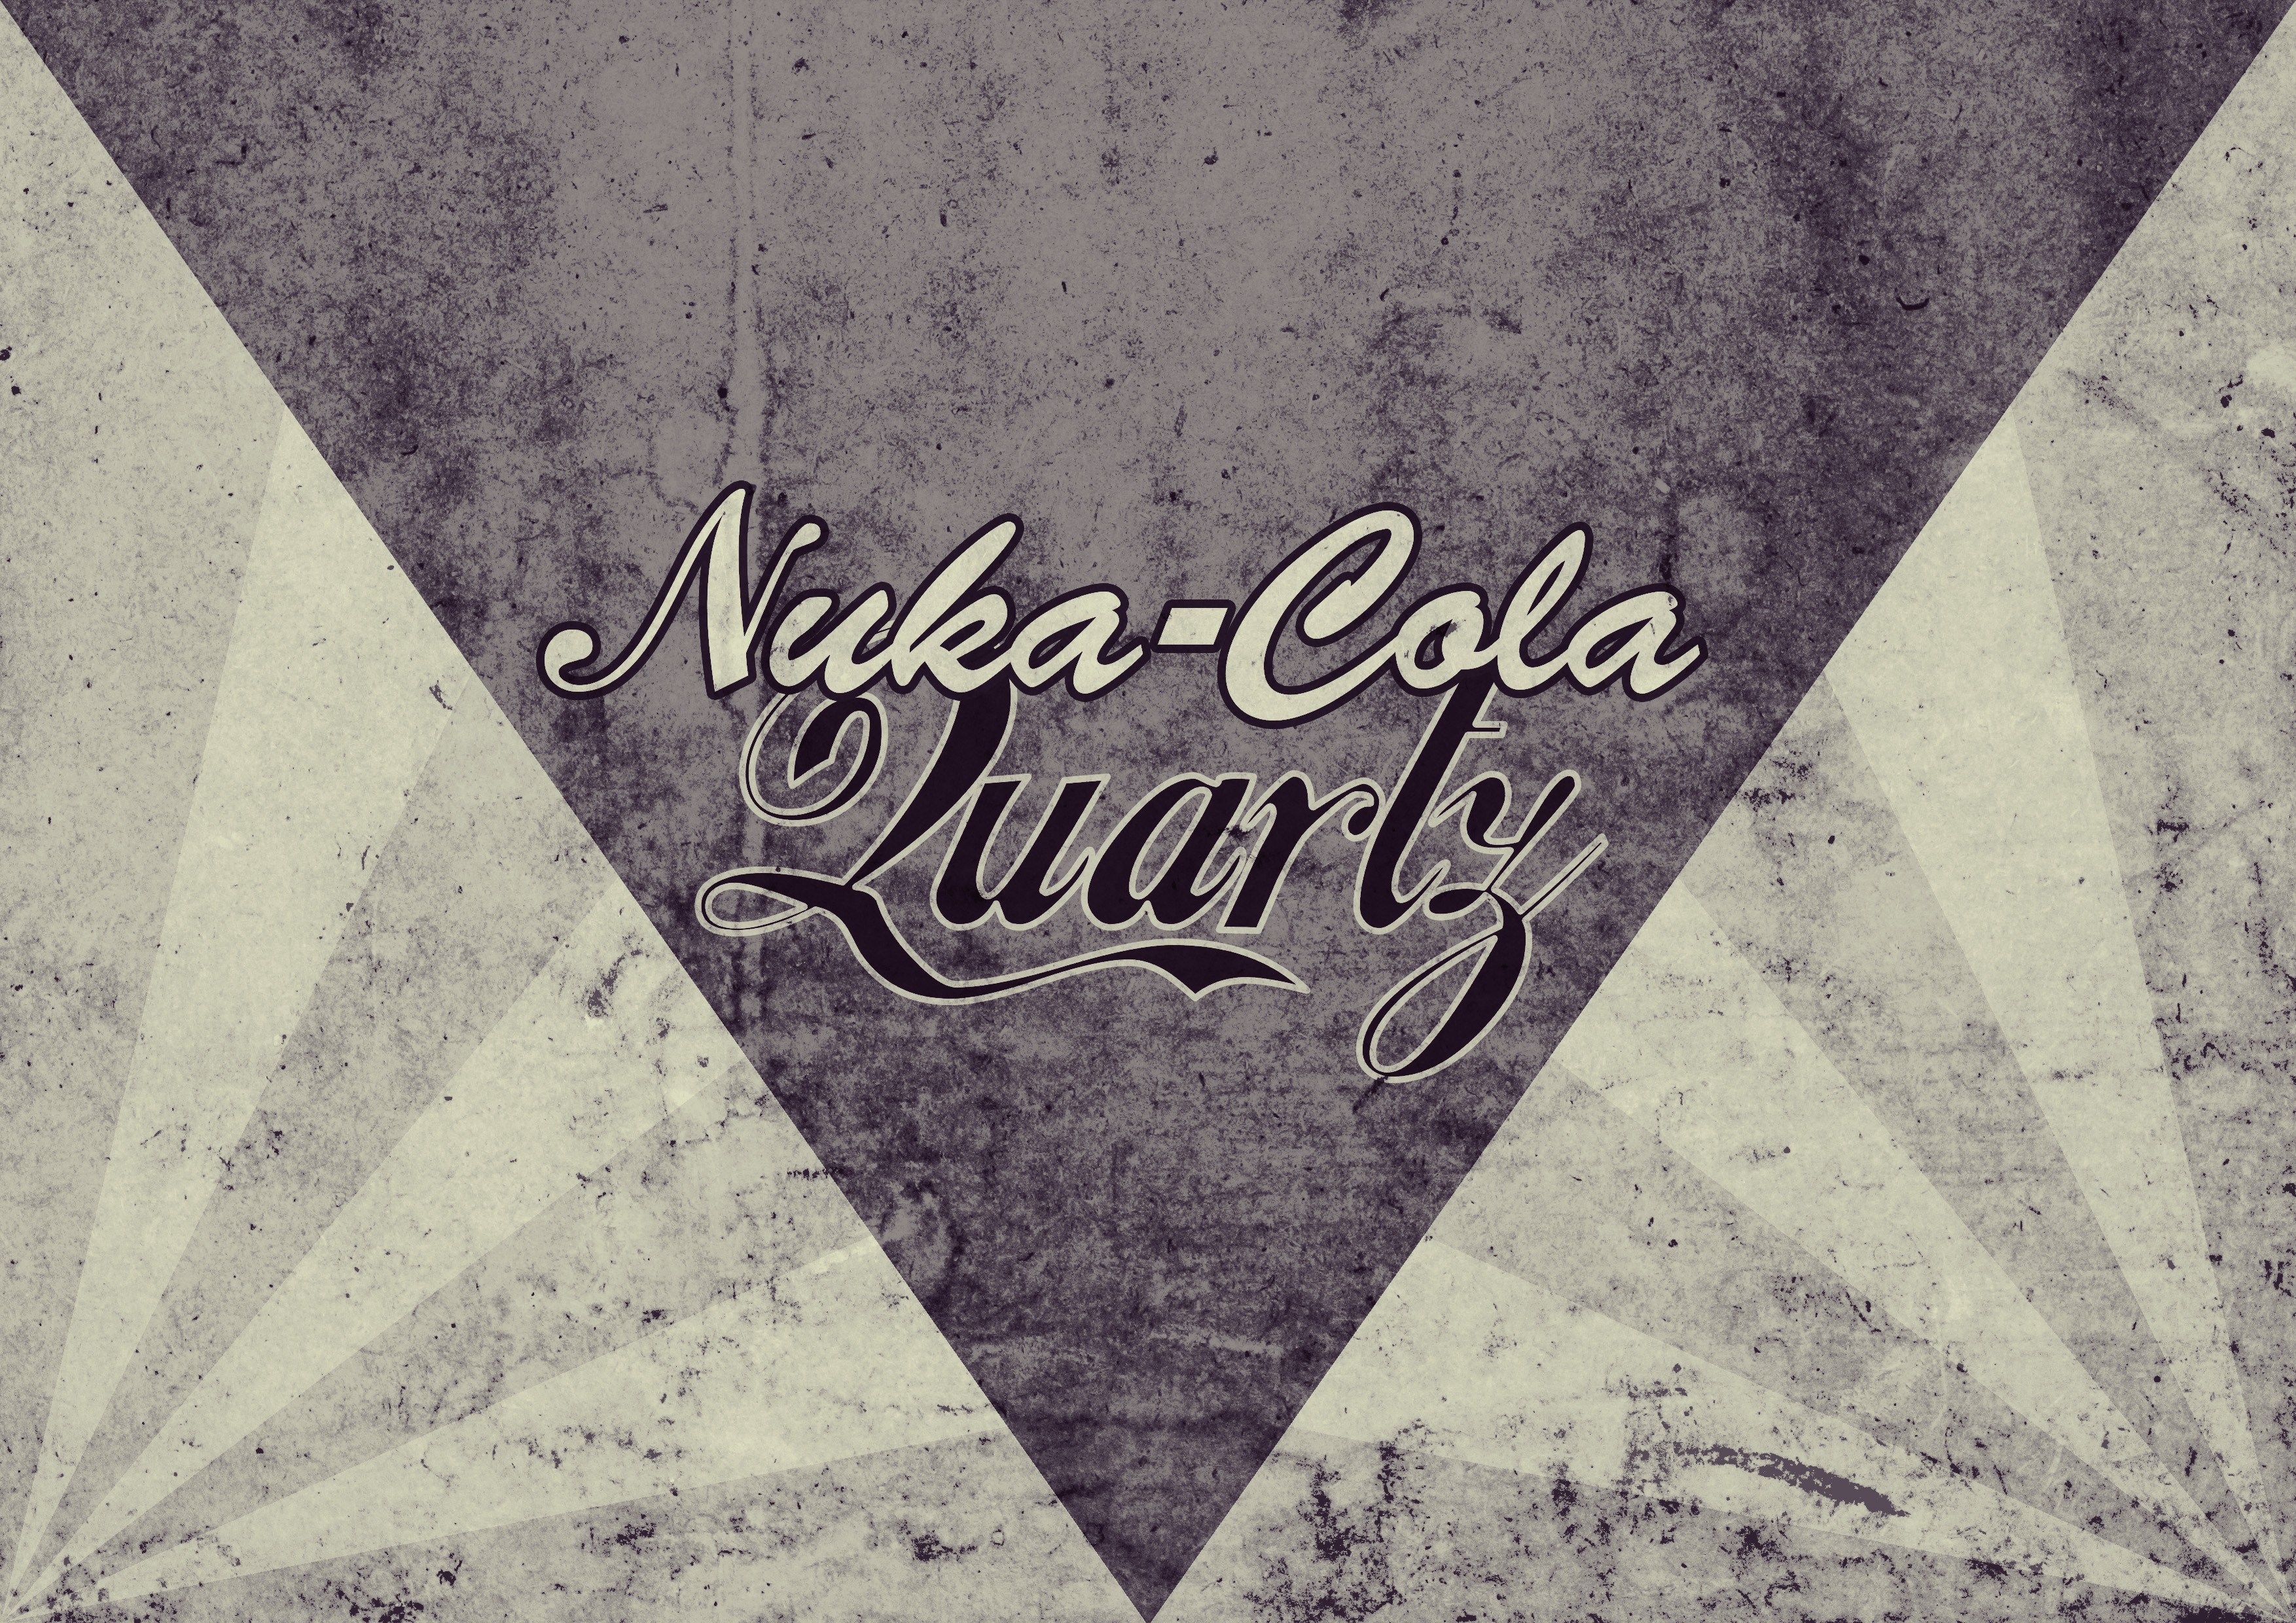 General 3508x2480 Fallout Nuka-Cola fan art video games PC gaming video game art